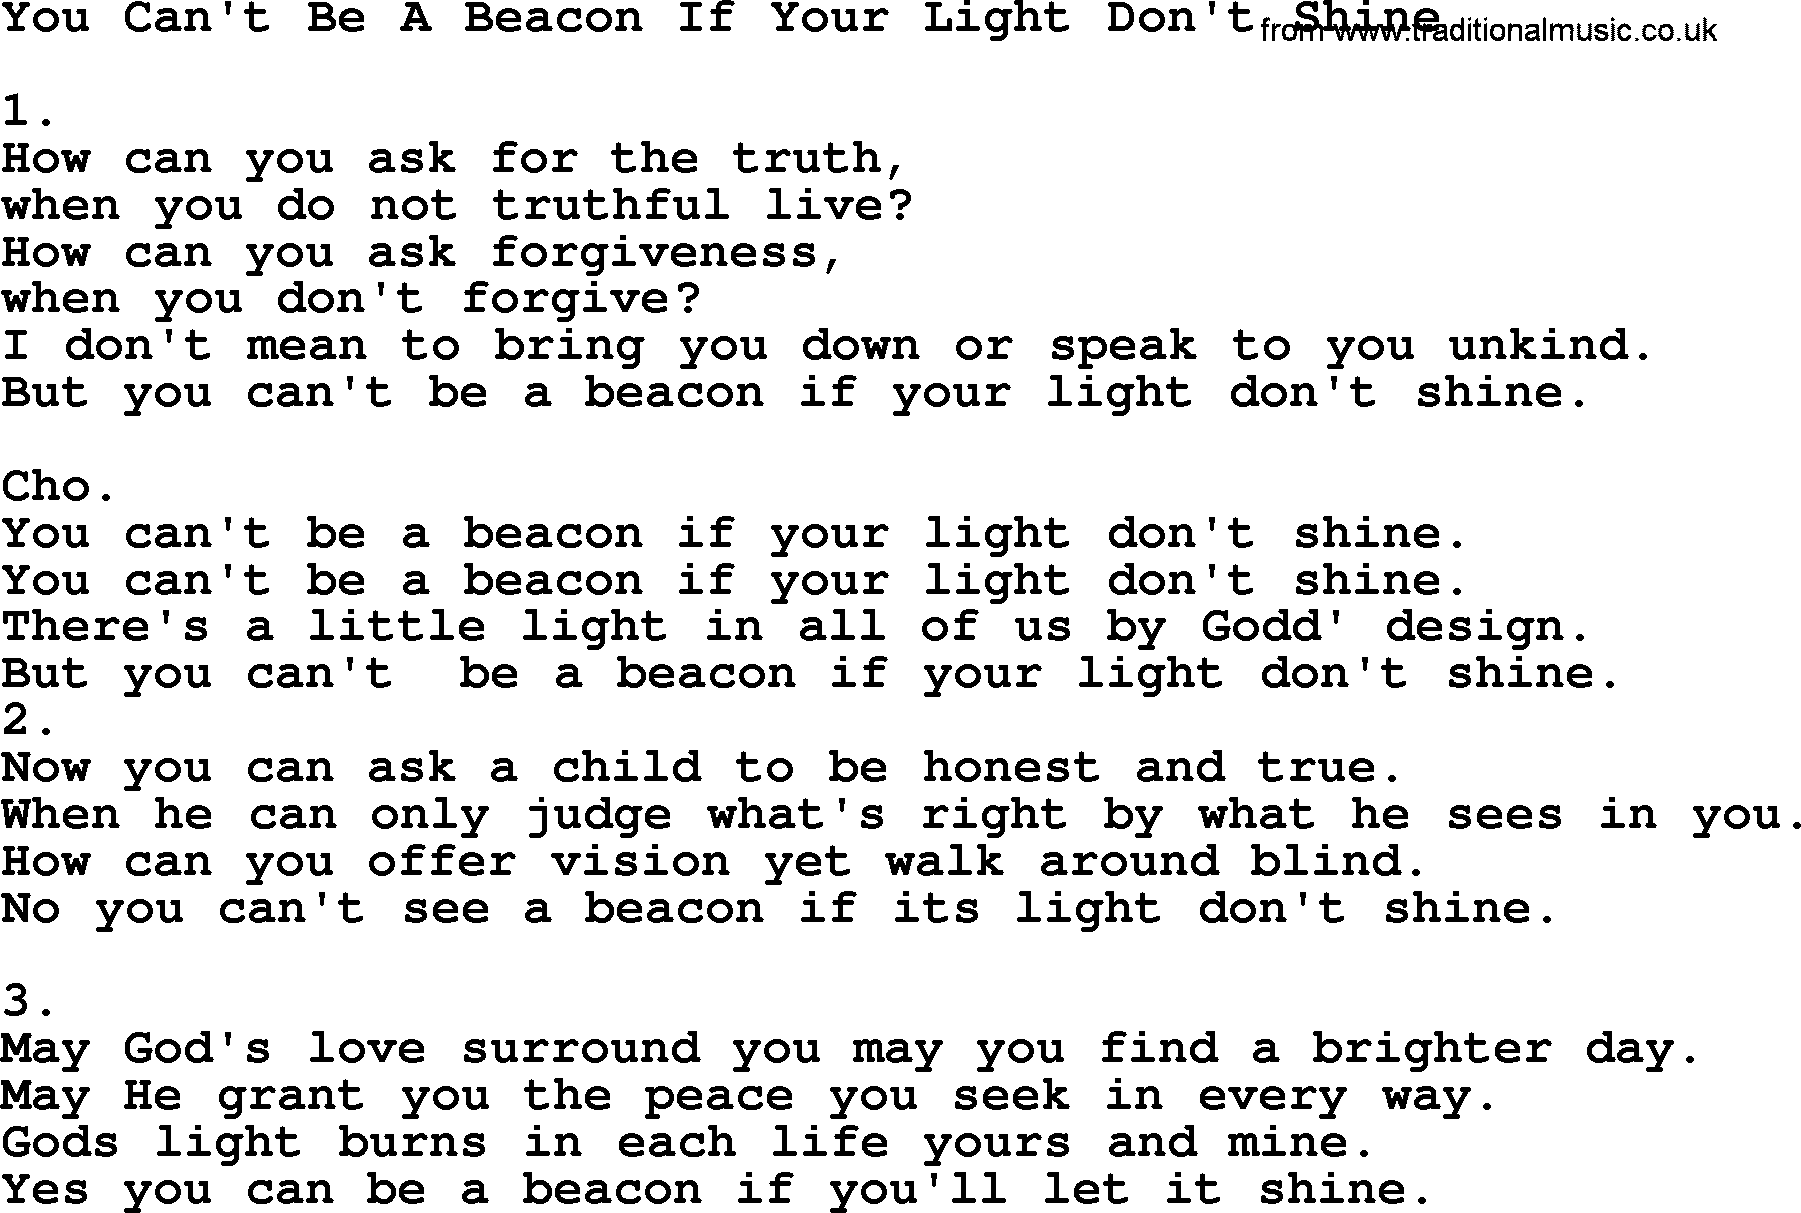 Apostolic & Pentecostal Hymns and Songs, Hymn: You Can't Be A Beacon If Your Light Don't Shine lyrics and PDF